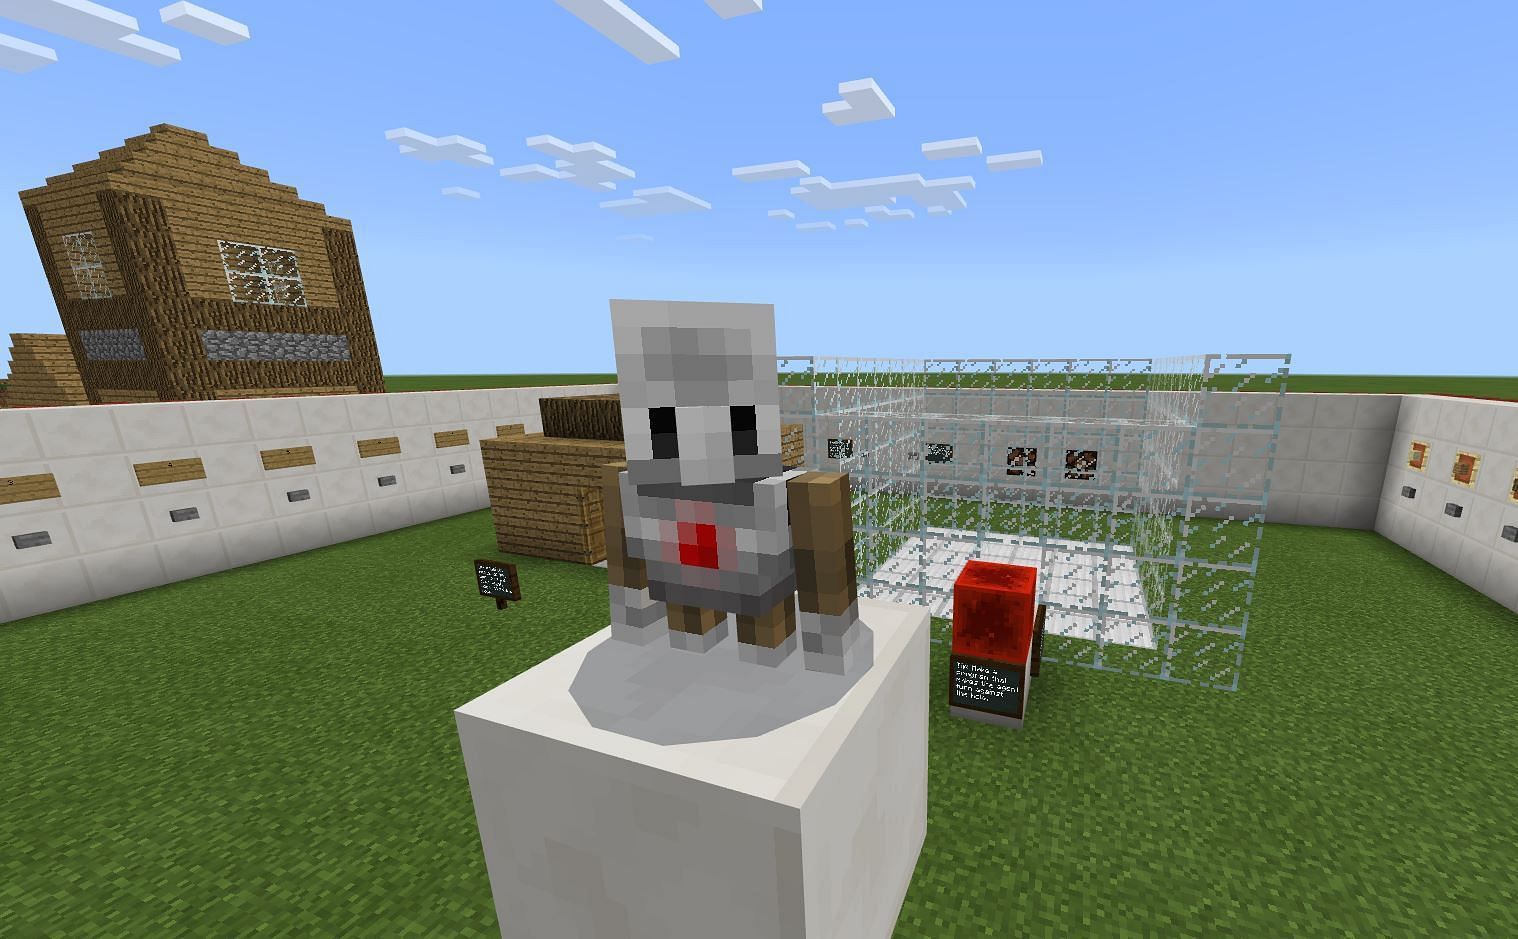 Agents are NPCs that can be coded to do various activities. Image via Minecraft